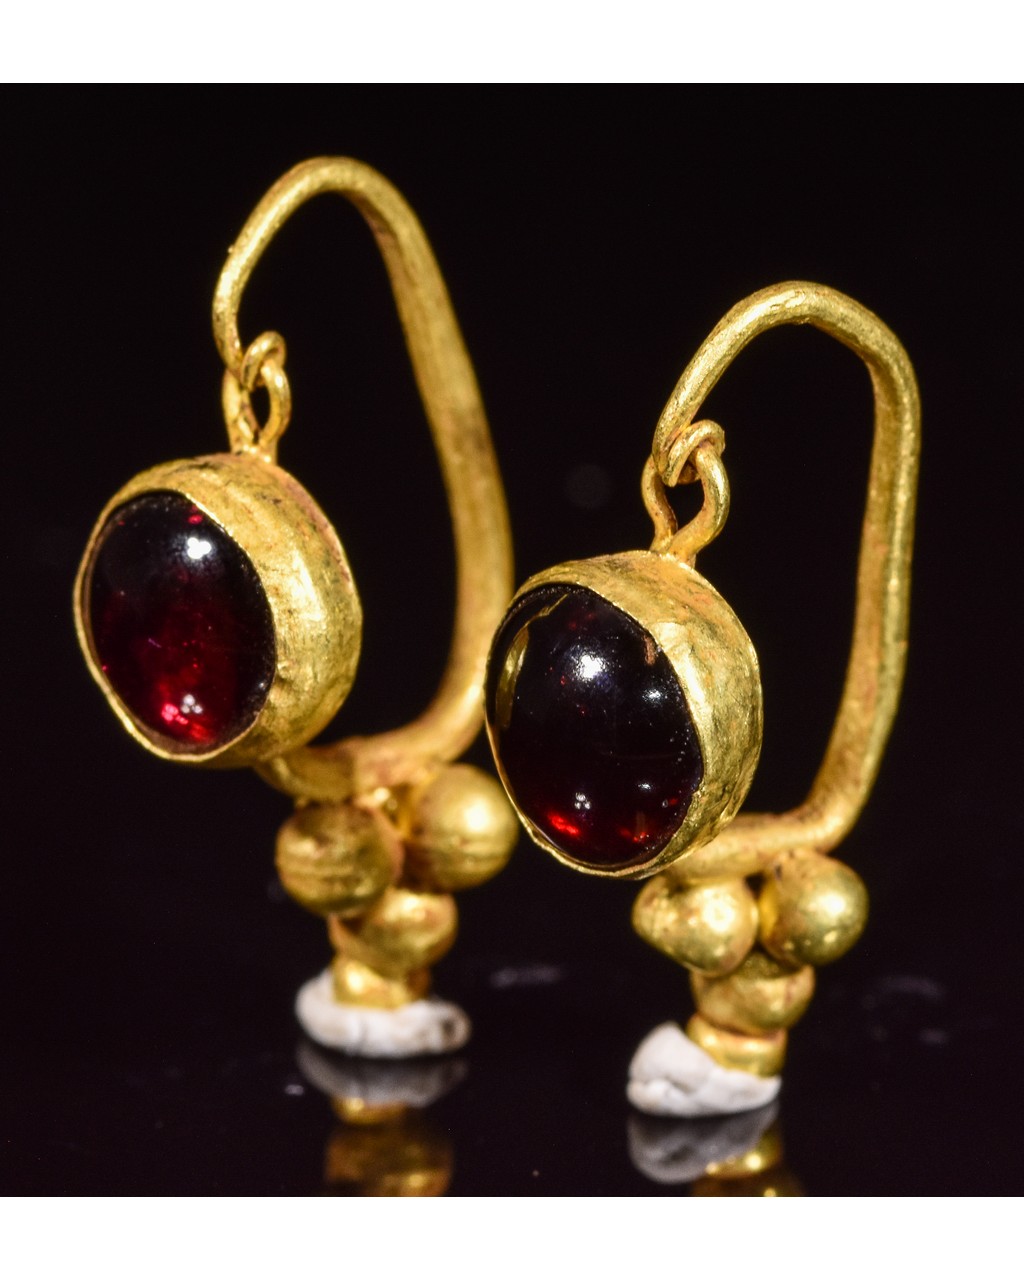 PAIR OF ROMAN GOLD EARRINGS WITH GARNETS - Image 5 of 7